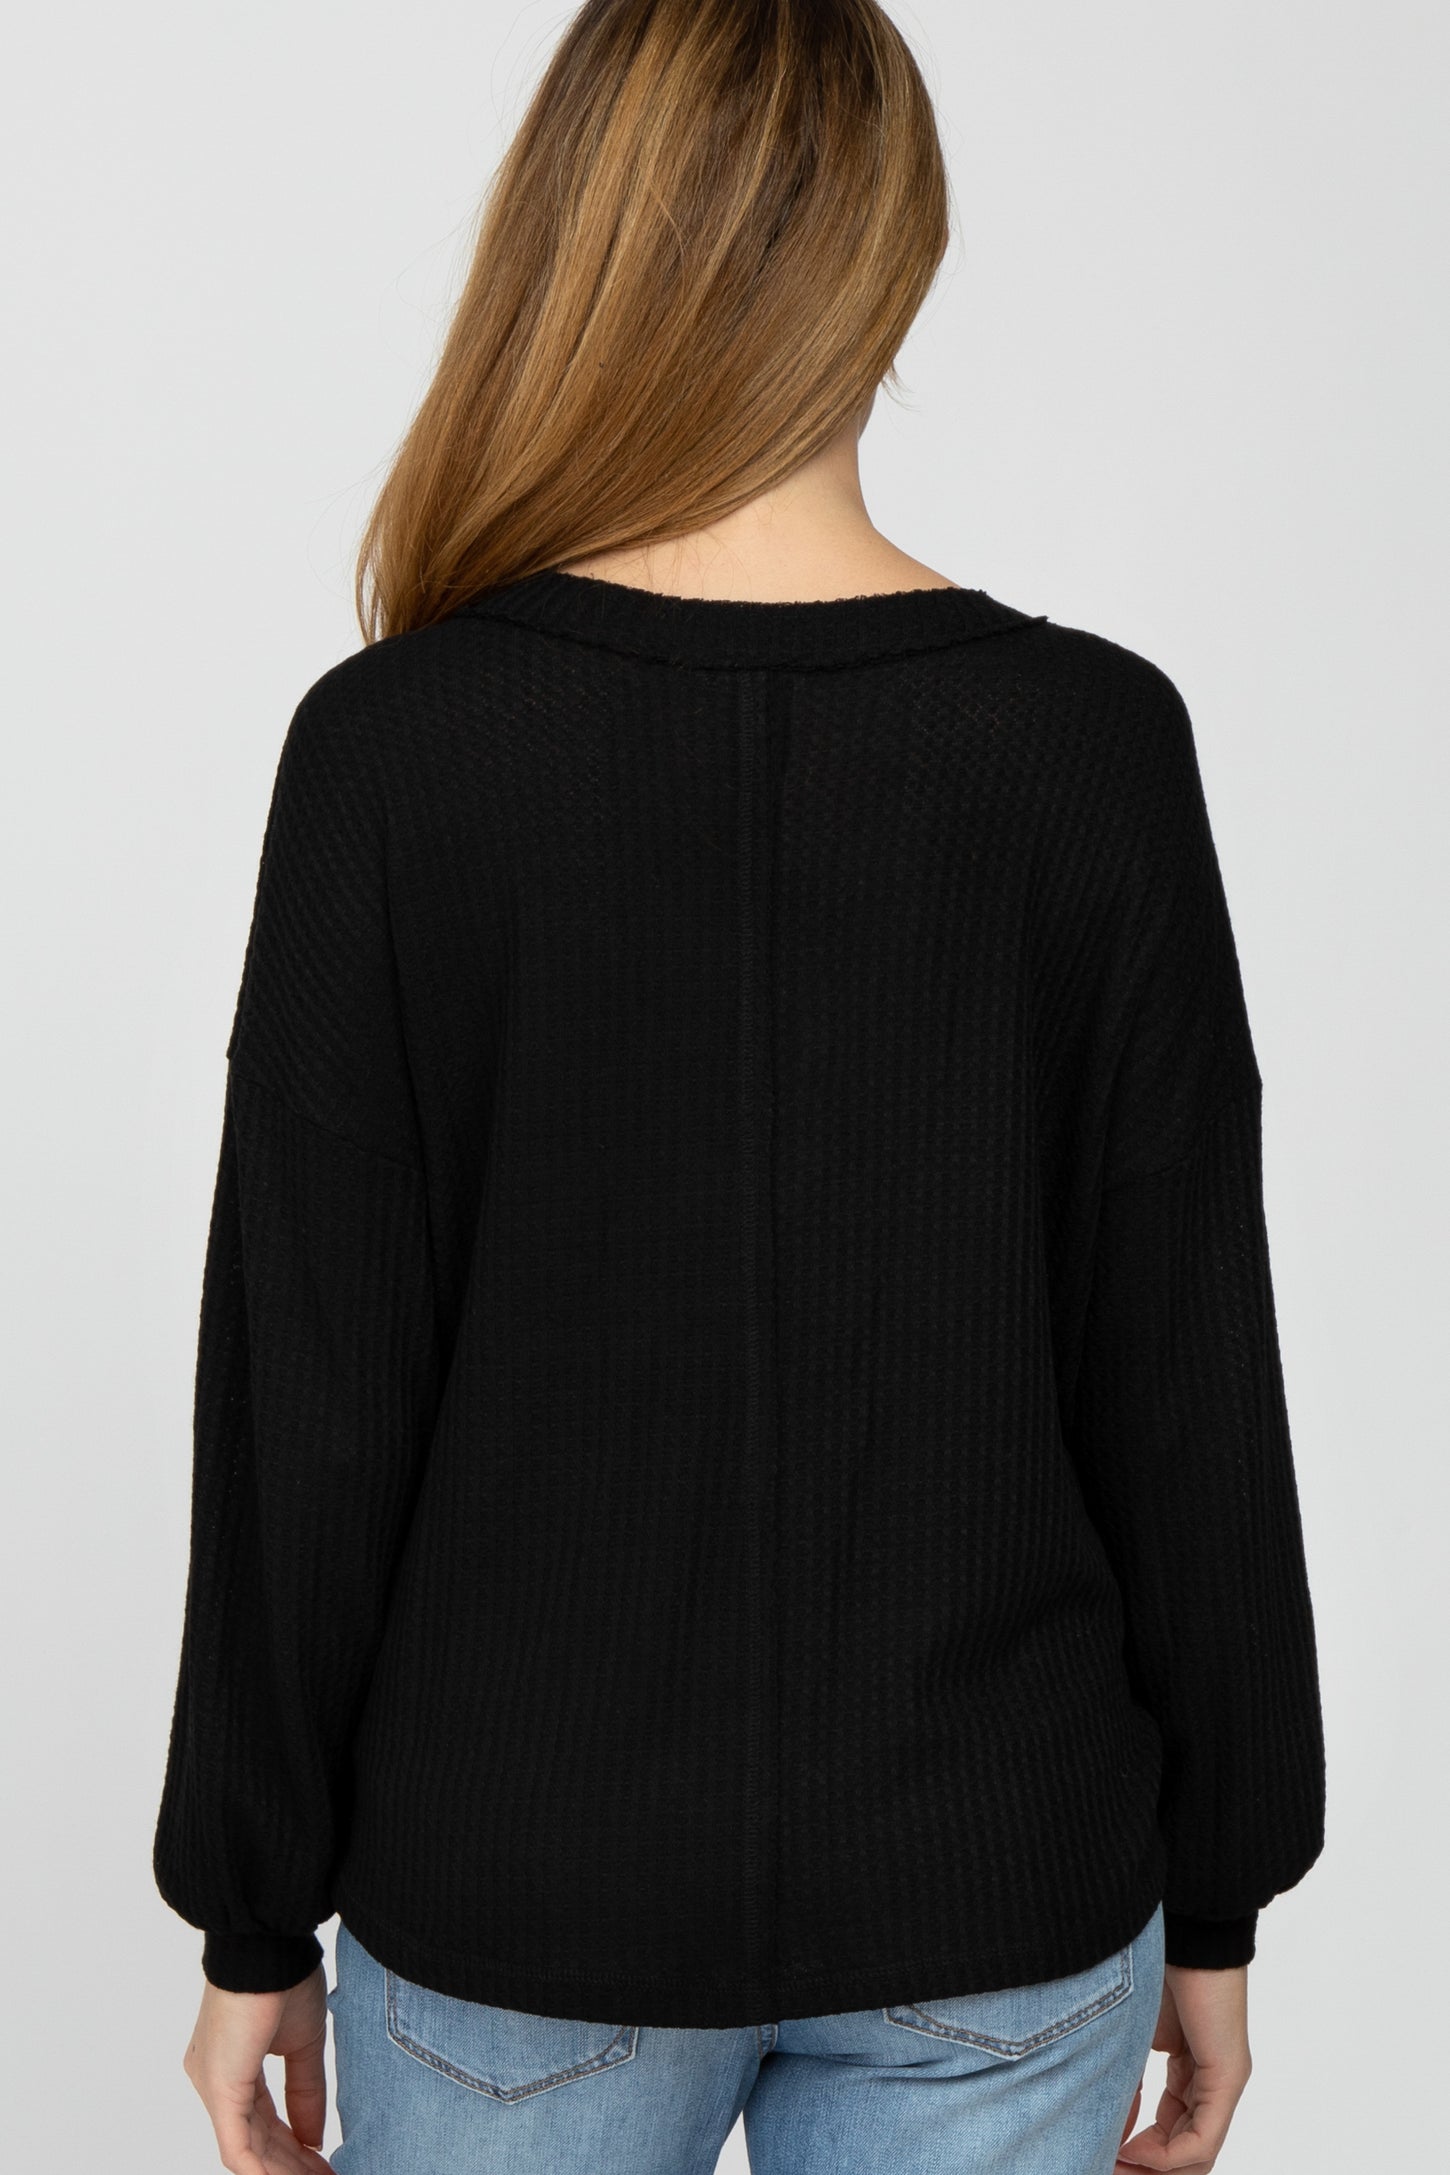 Black Waffle Knit Button Accent Maternity Top